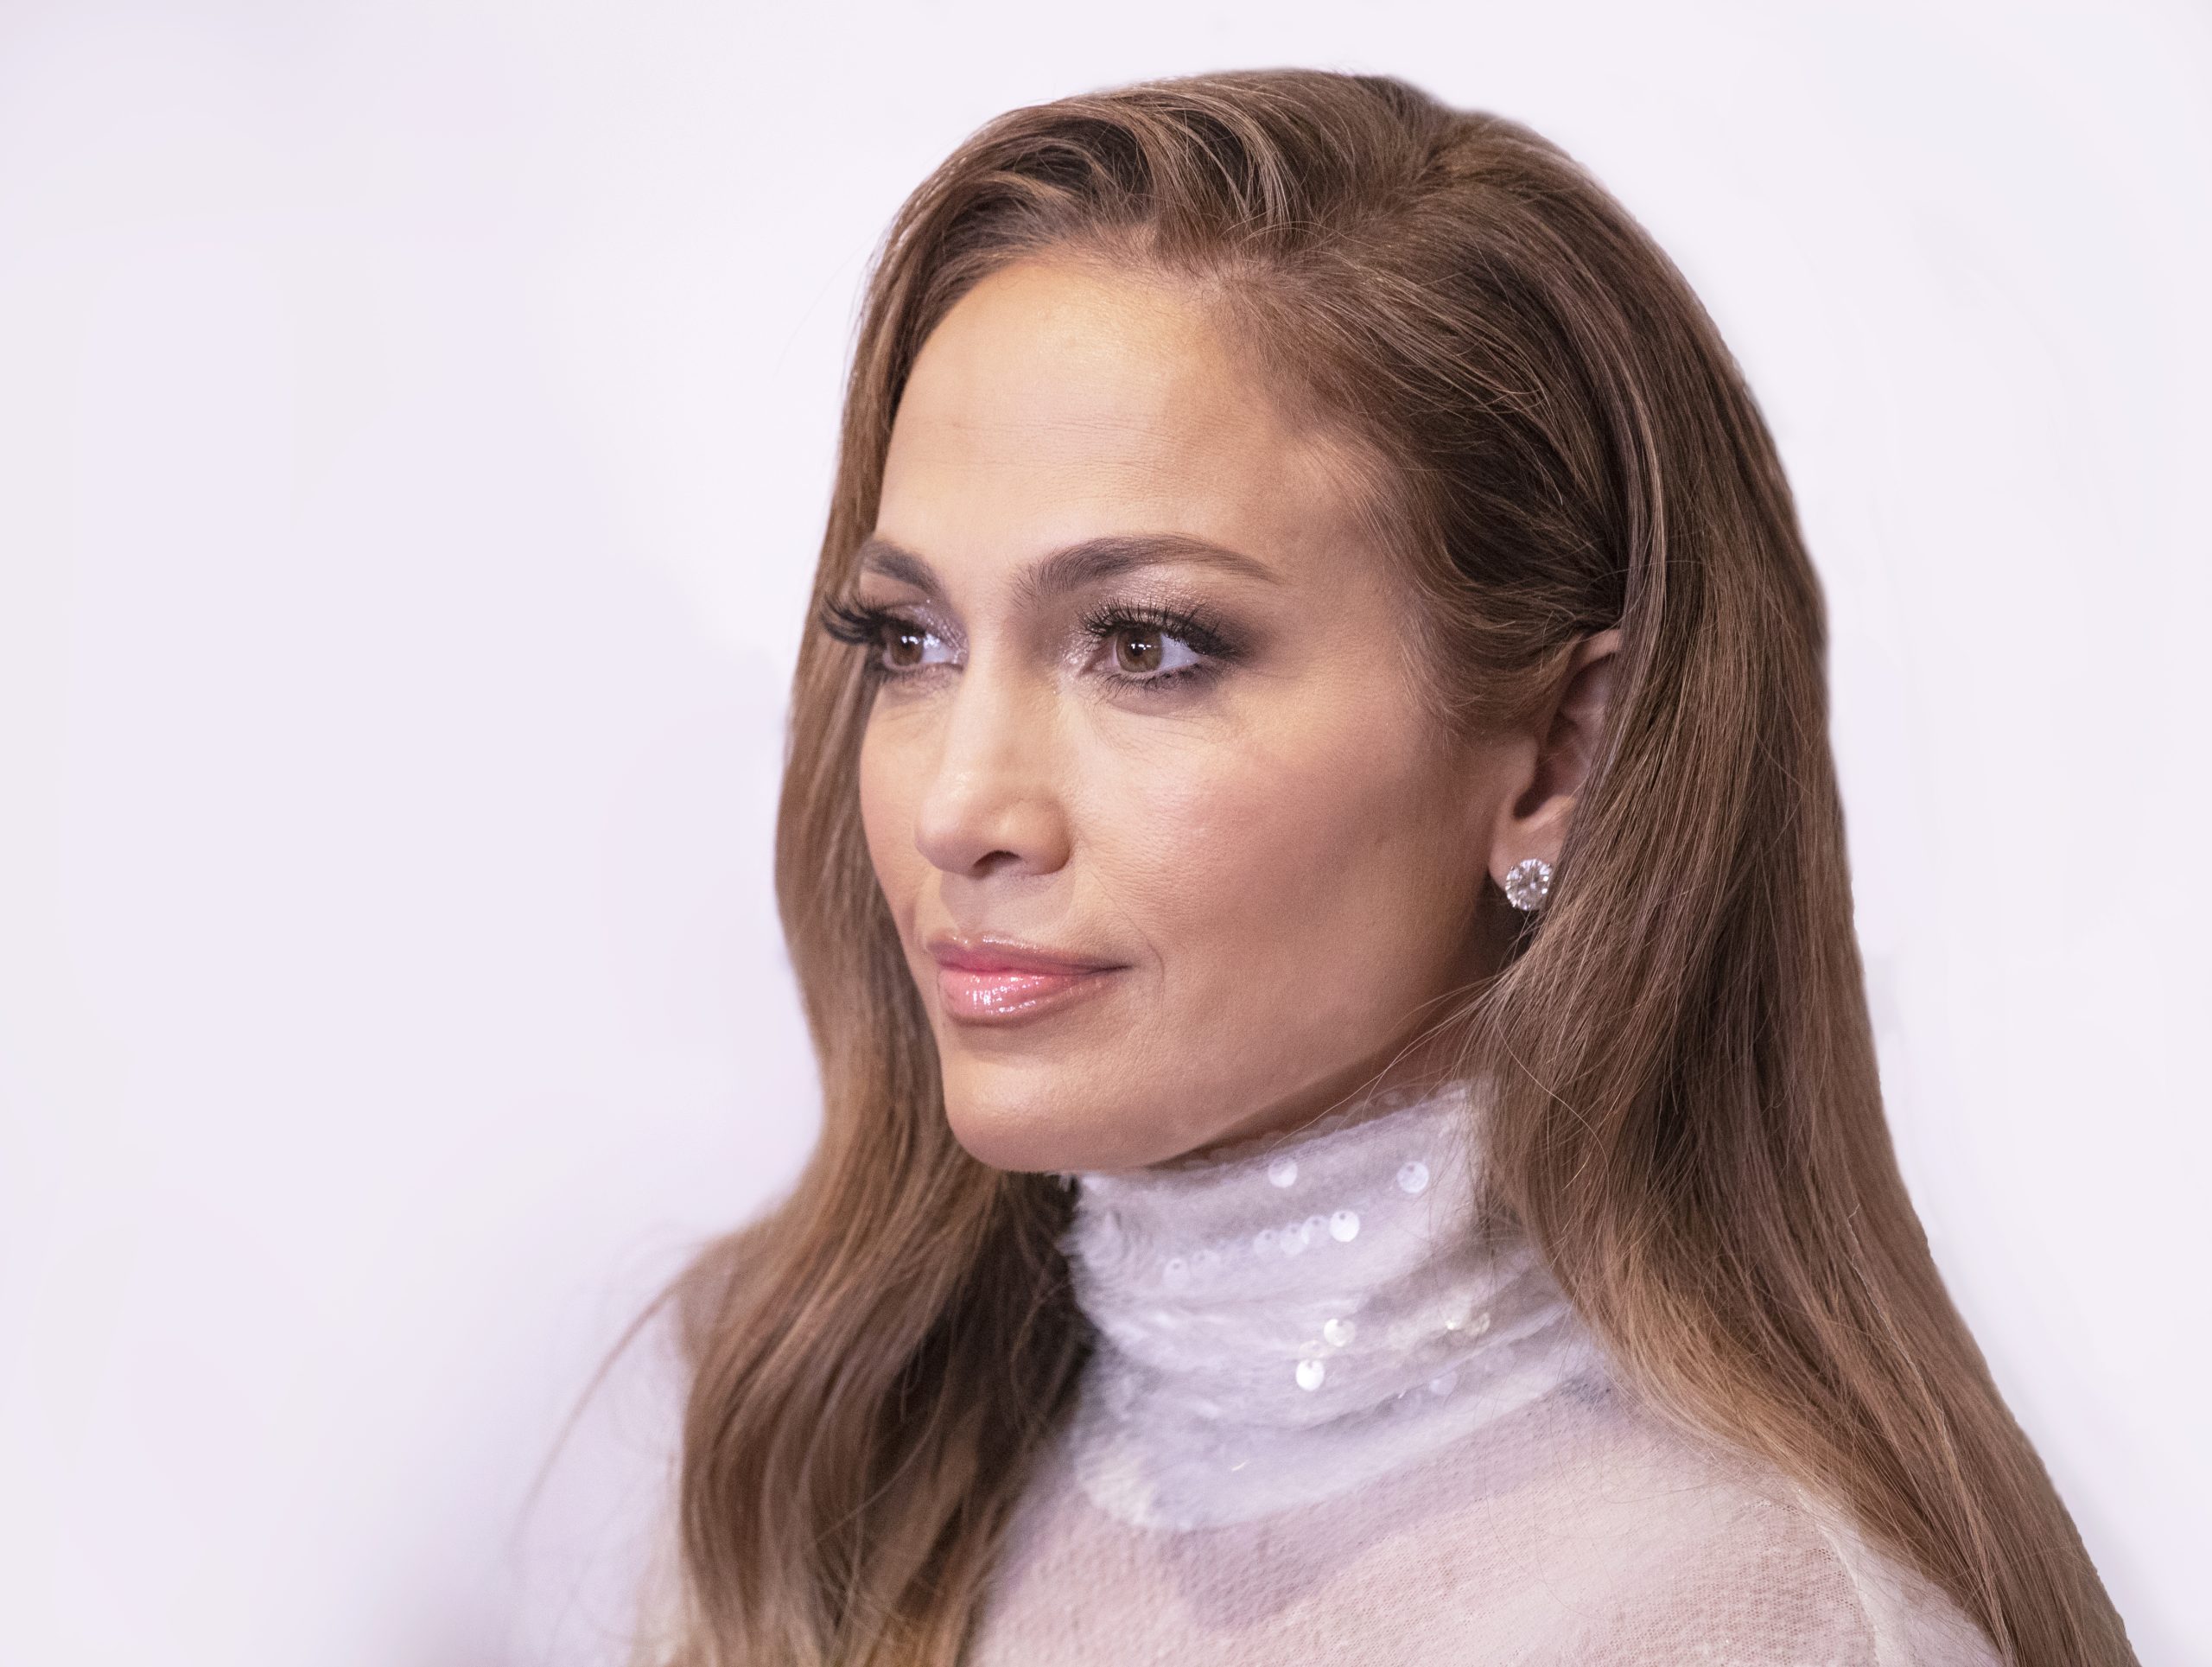 Celebrity Jennifer Lopez thrills fans with unseen wedding photos and more in New Year’s Eve video